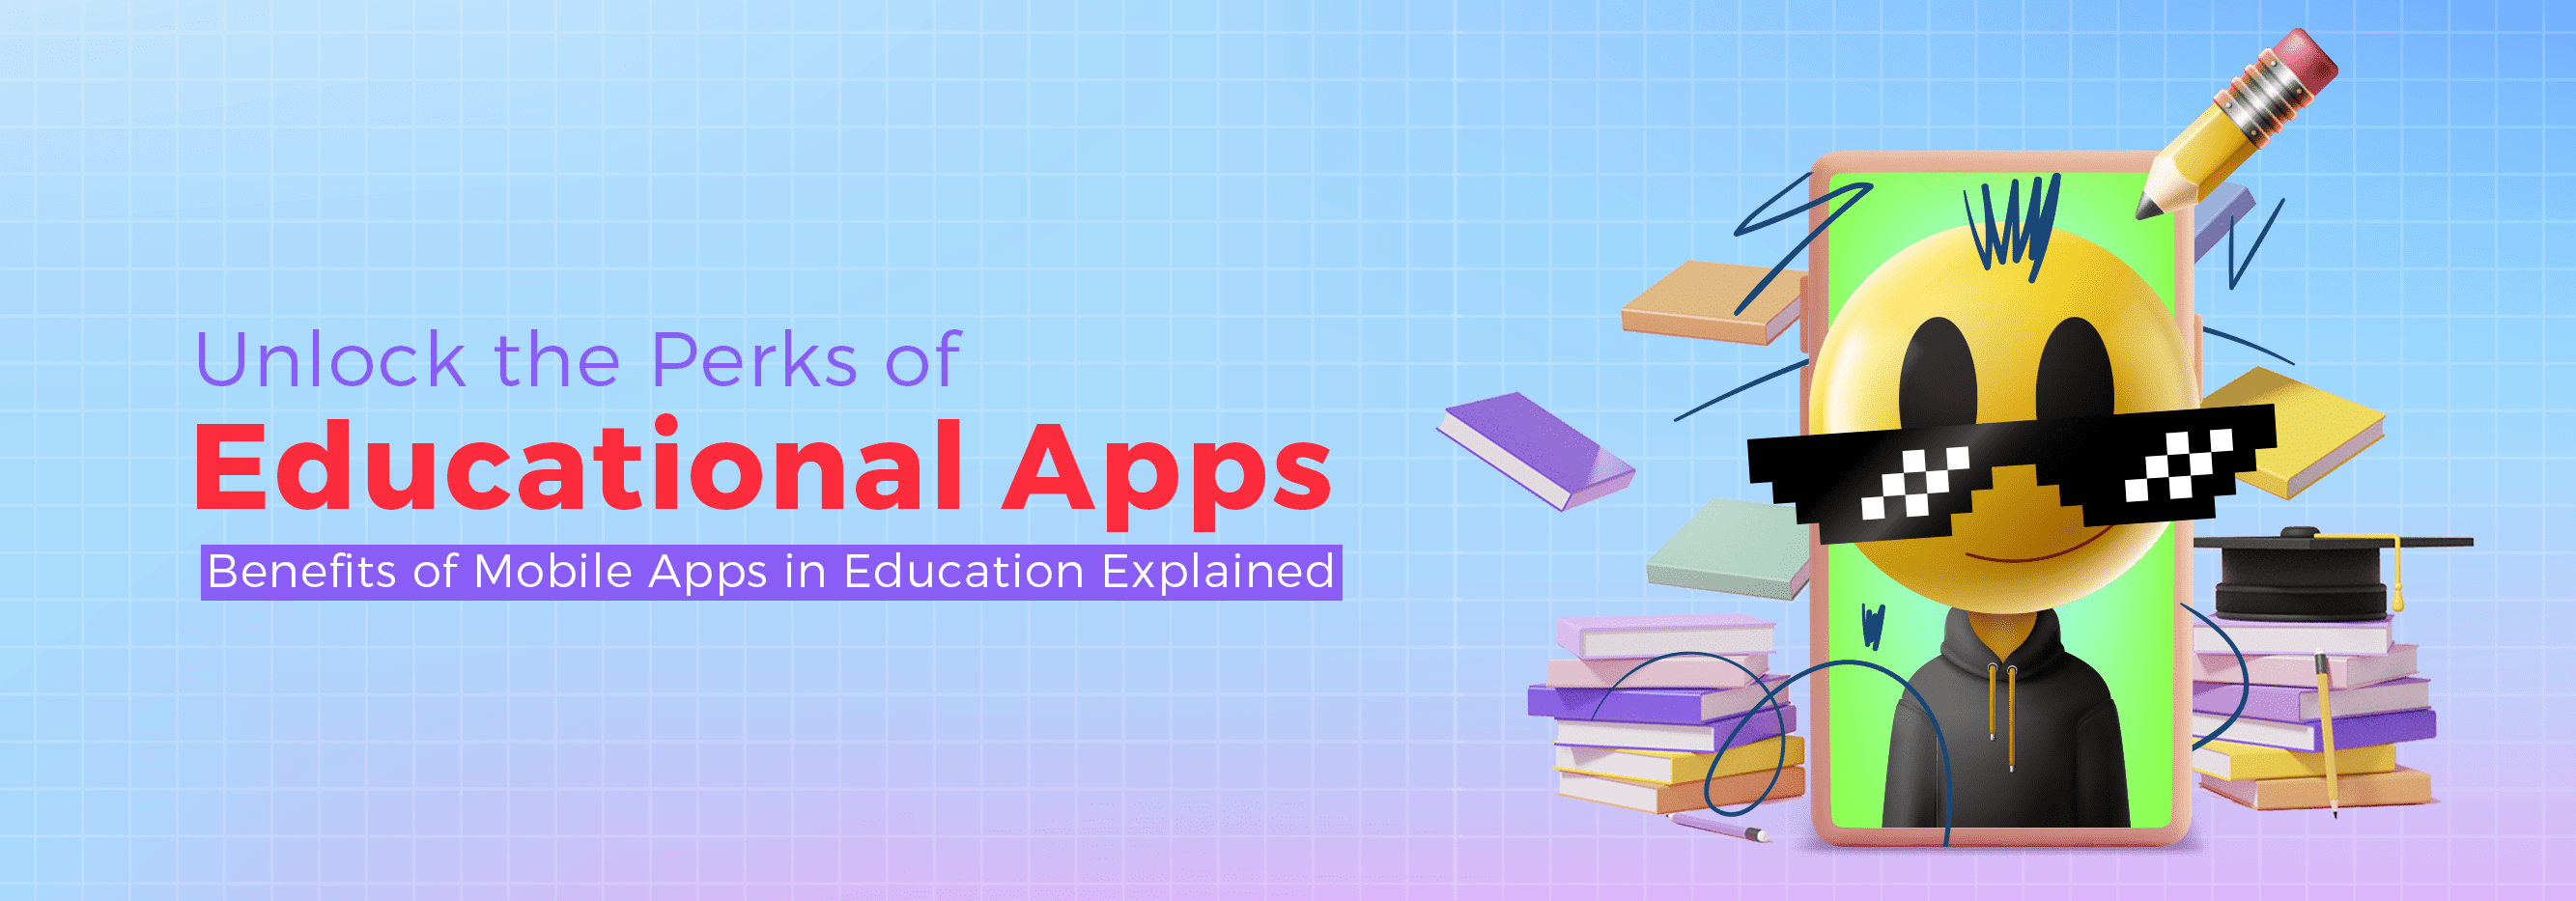 Benefits of Mobile Apps in Education